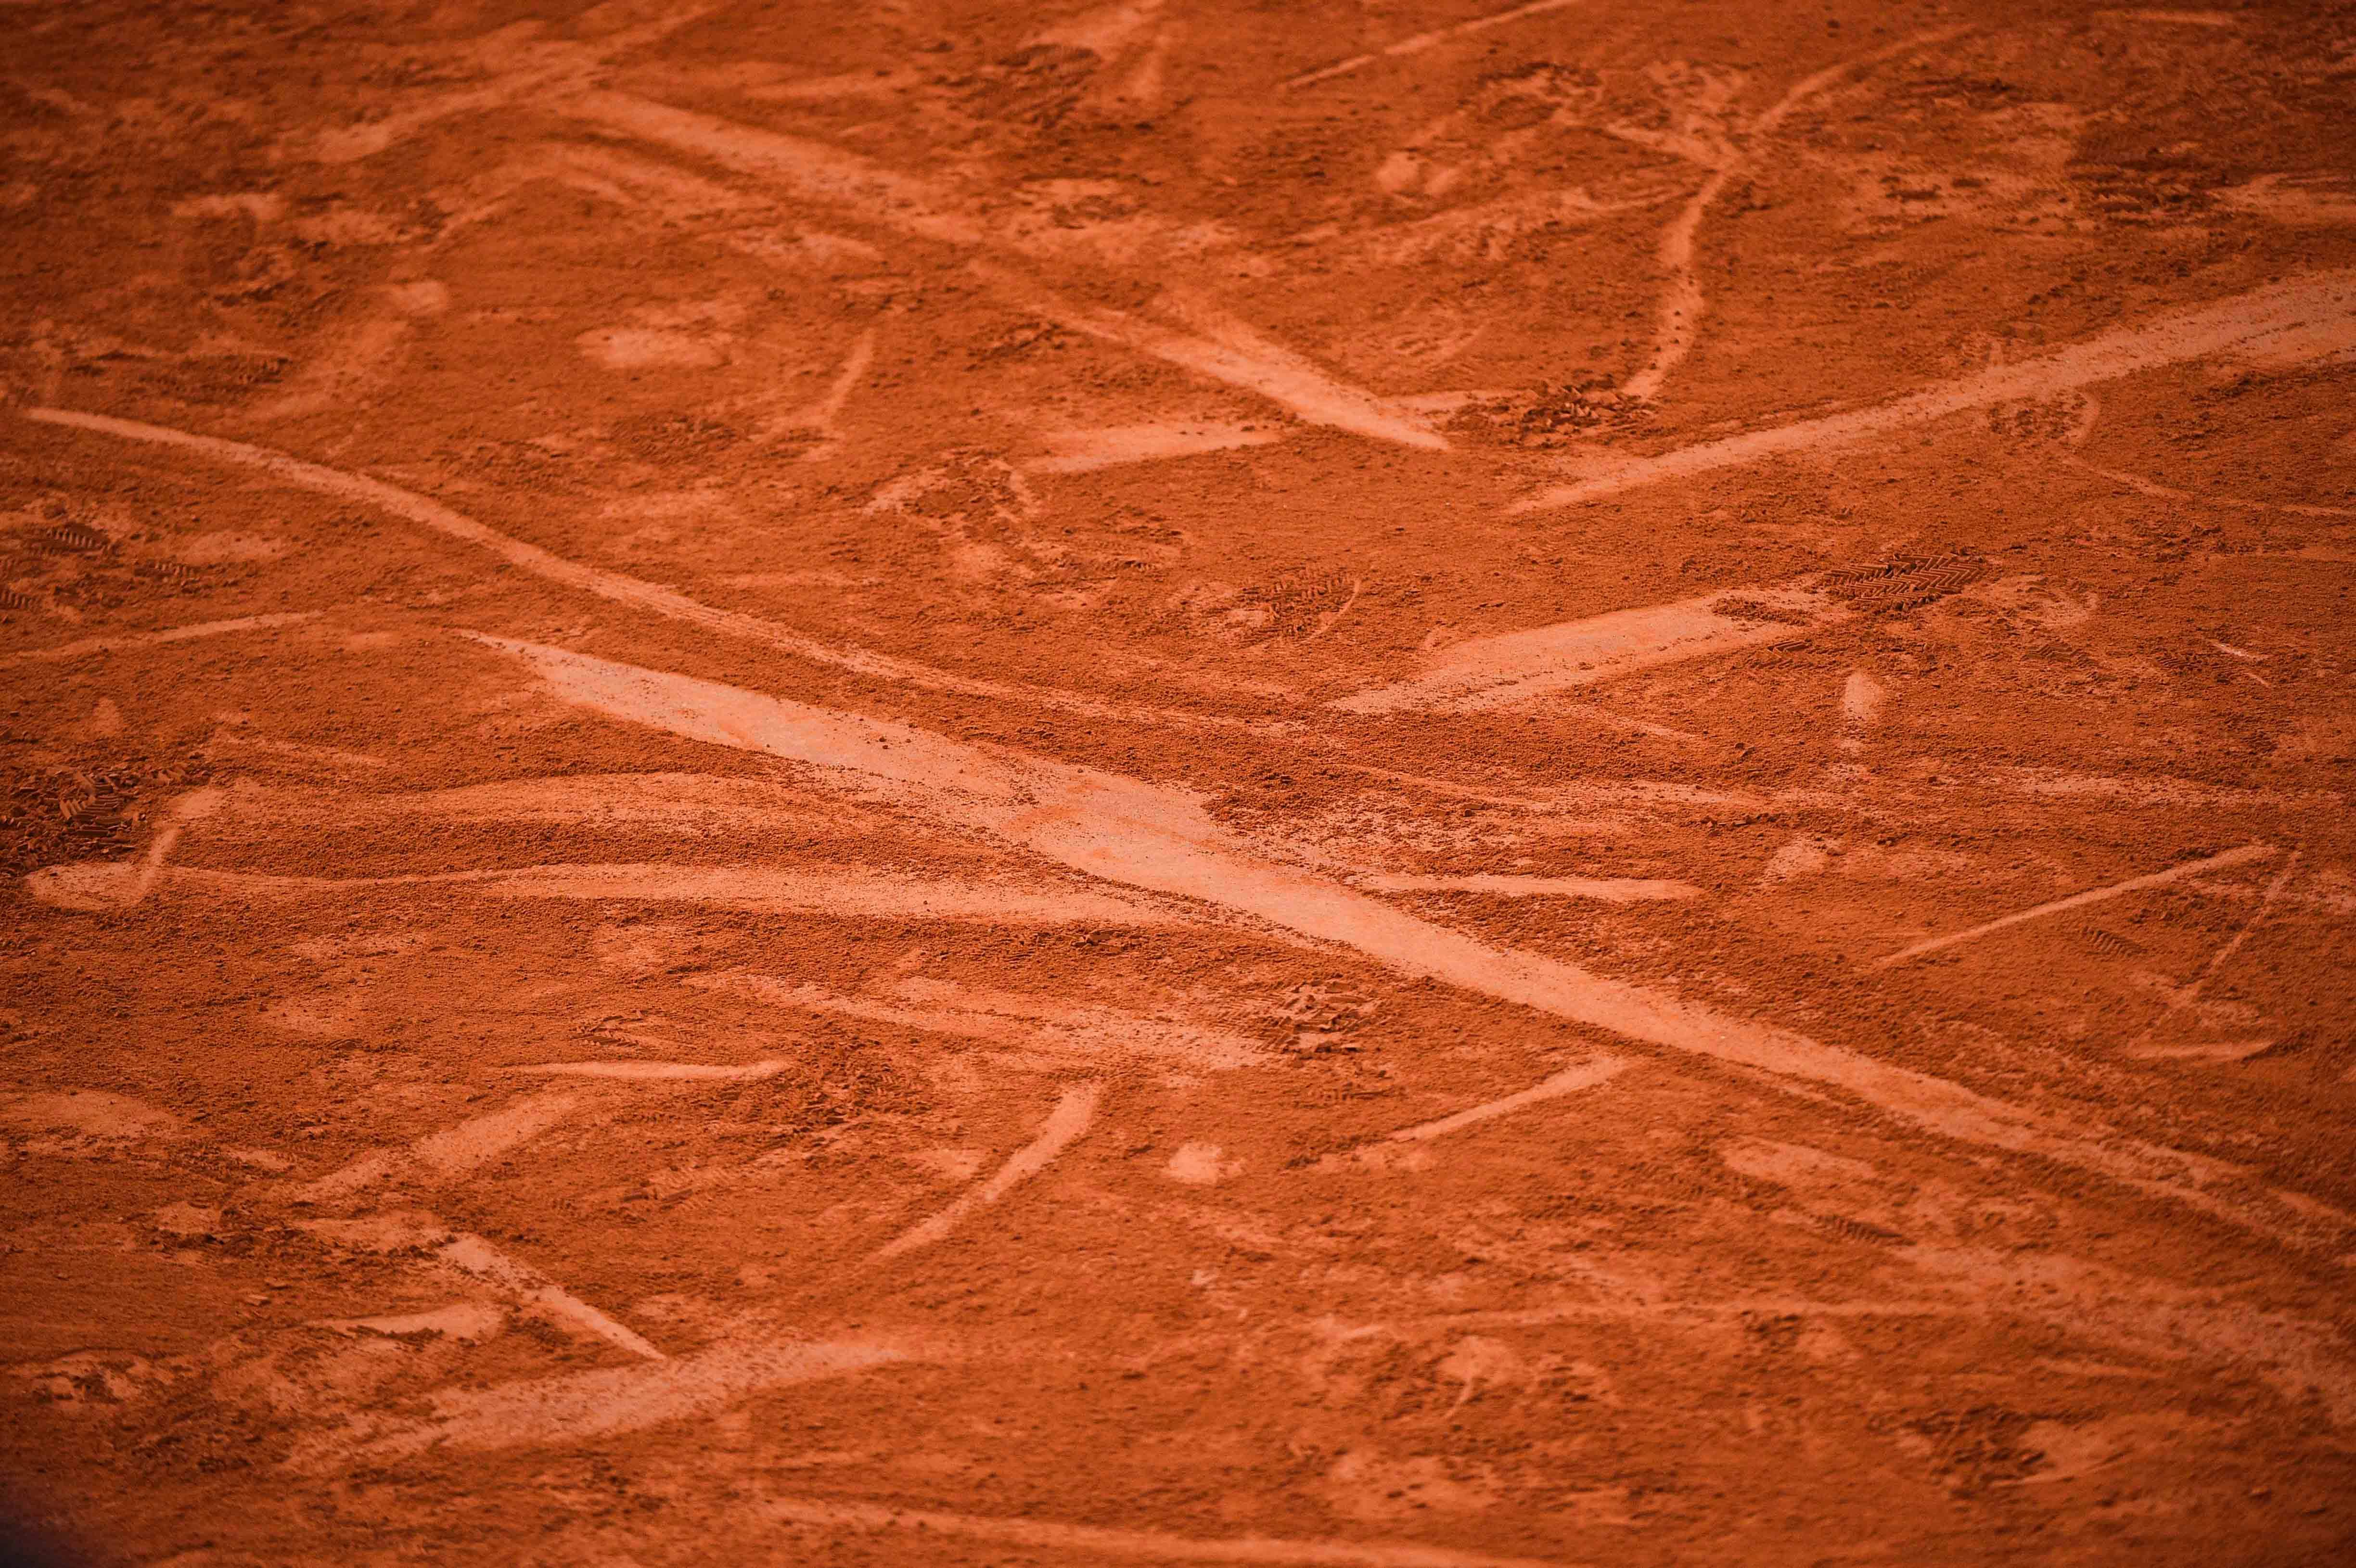 Slide marks on the clay